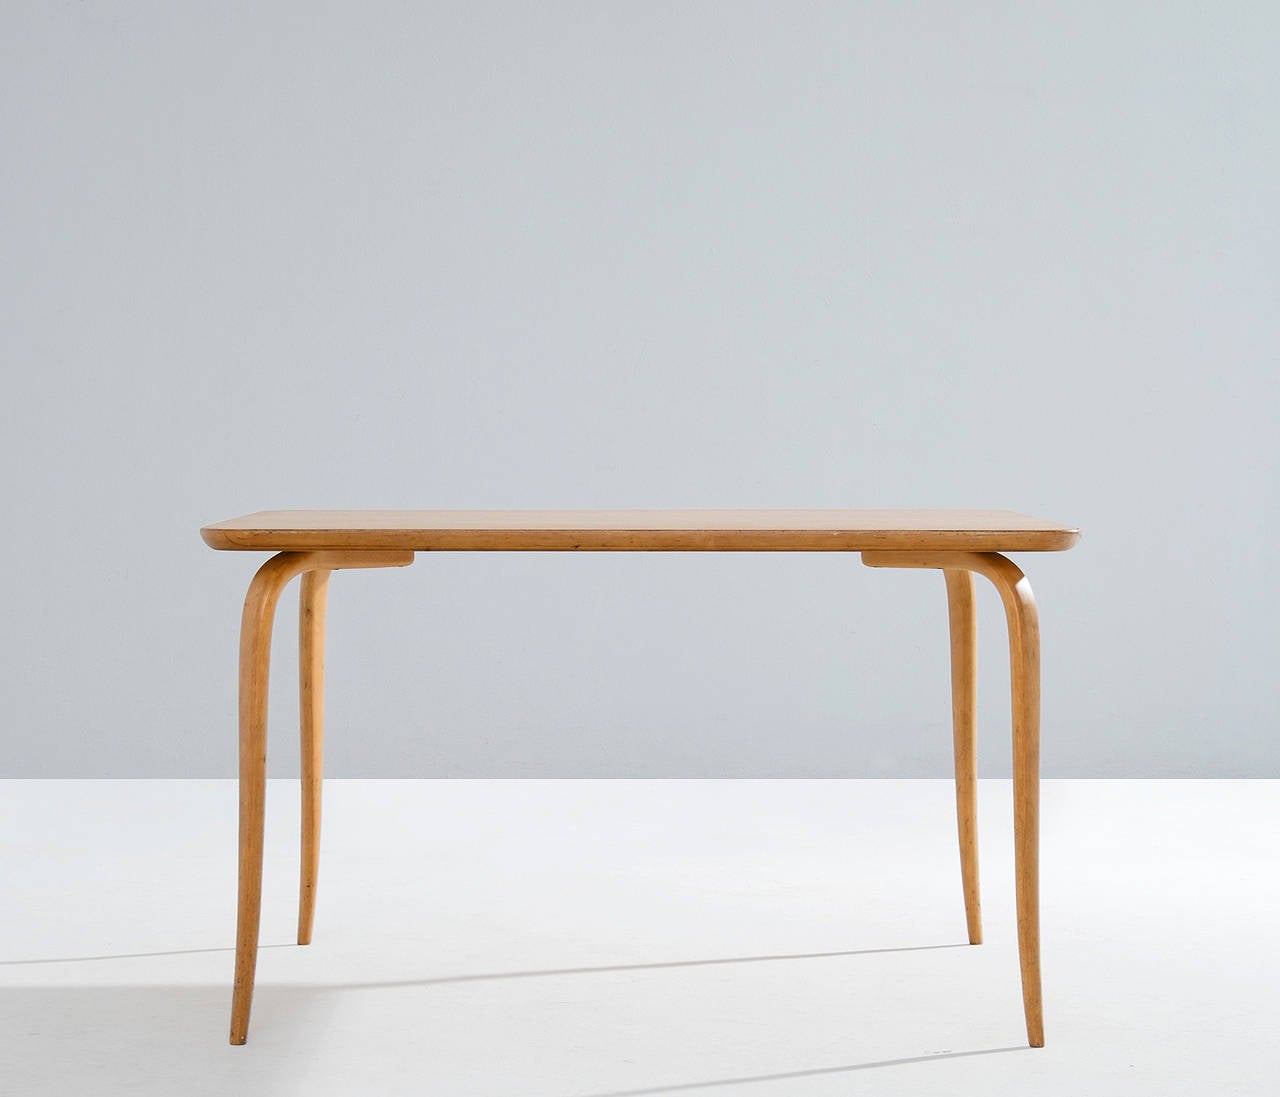 Very refined coffee table by Bruno Mathsson, Sweden, 1950s.

This Annika coffee table has birch plywood legs, which are fluently curved and tapered. These light legs are elegant and give this piece its unique appearance.

The burl wood veneer